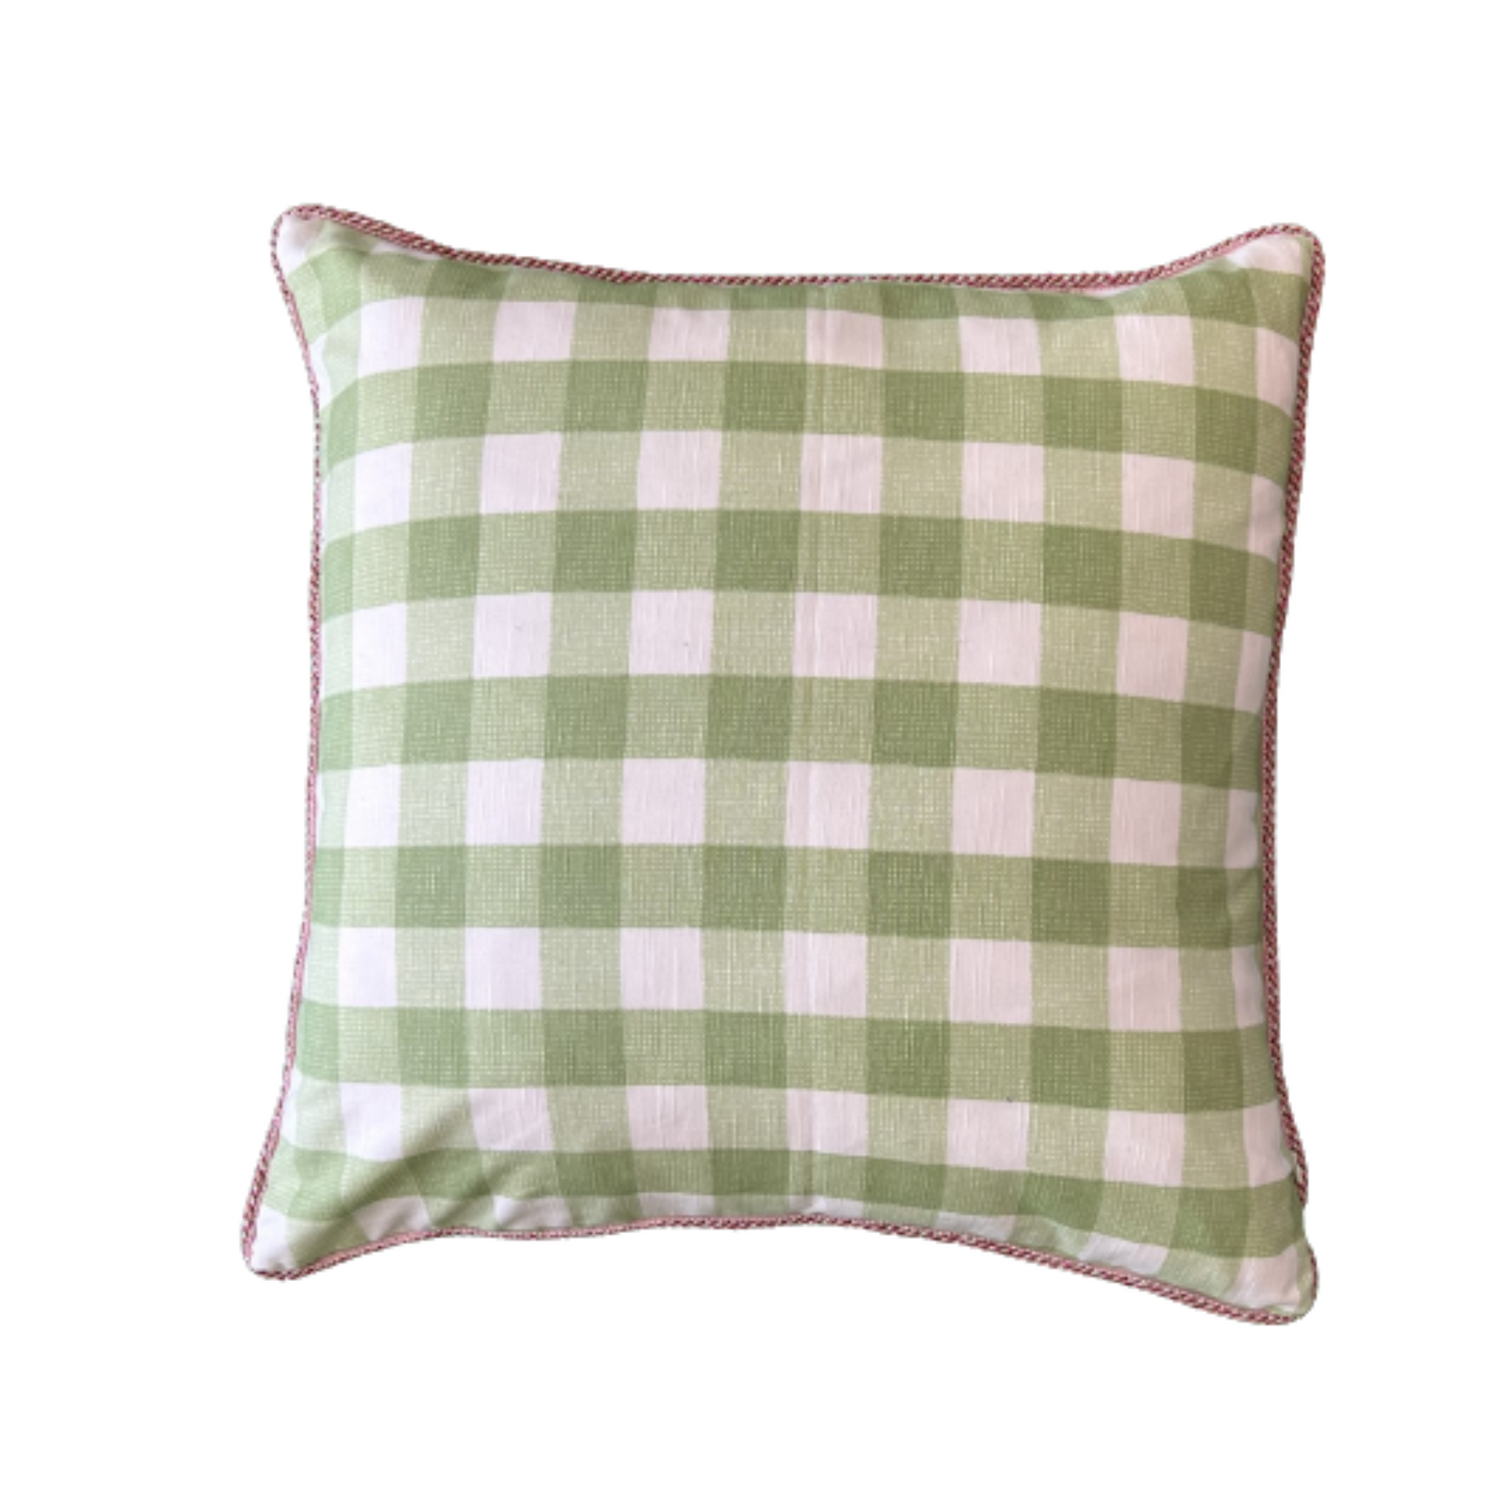 Charming Pink and Green Garden Bugs 24 x 24 Square Designer Pillow Front with Down Feather Insert